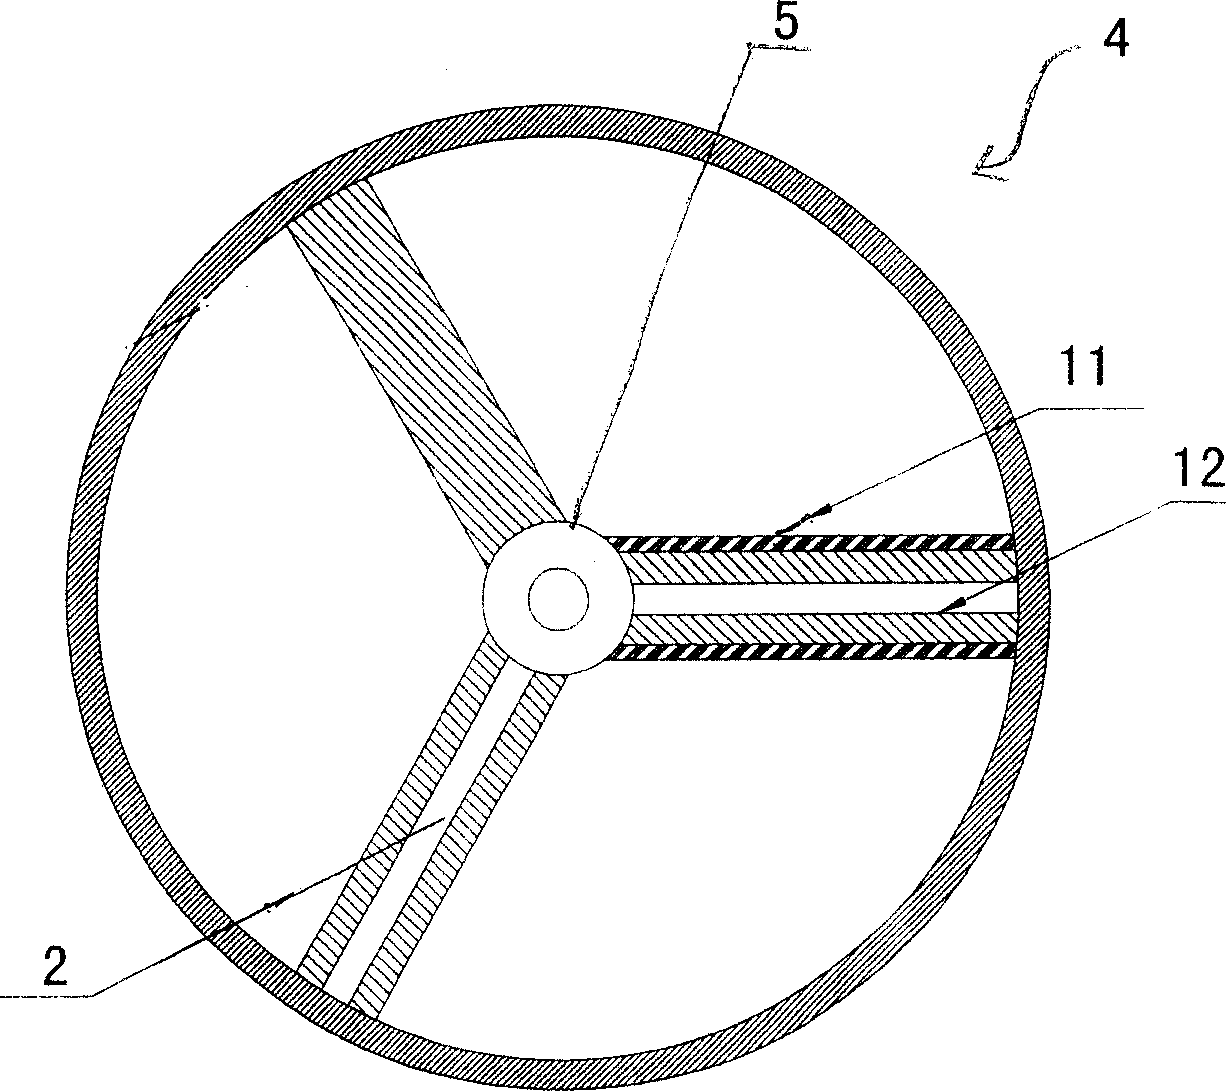 Methanol/ethanol trapped vortex micro-combustor pre-heating intaking method and device for automobile cold-starting